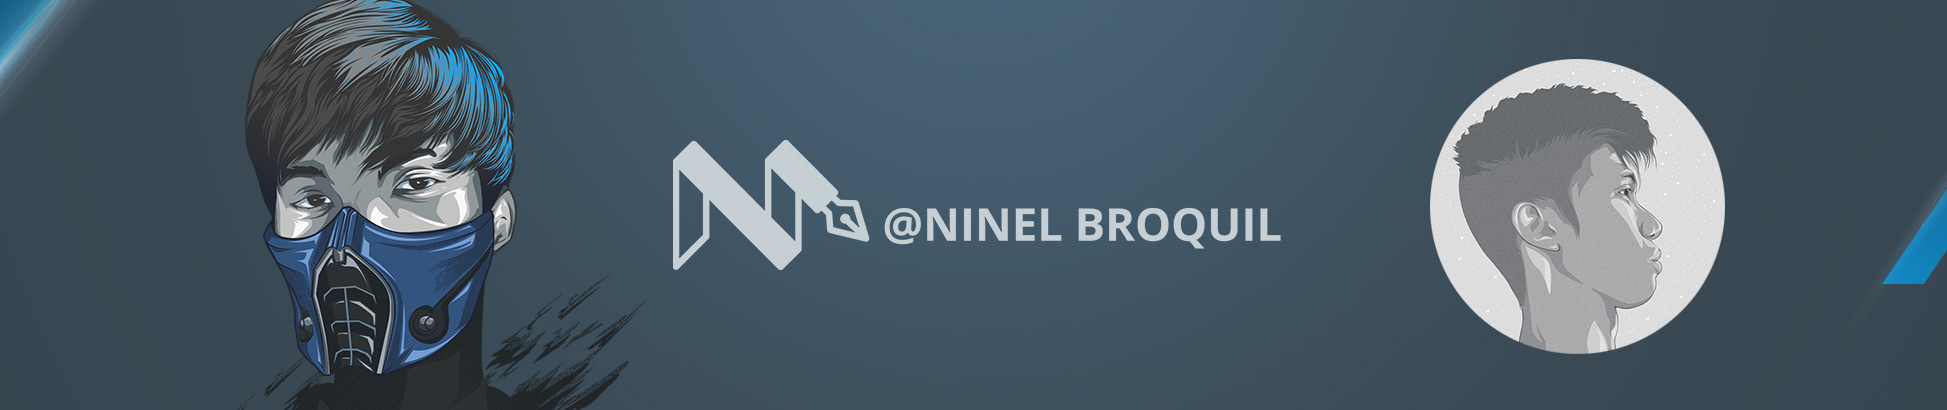 Ninel Mikhael Broquil's profile banner